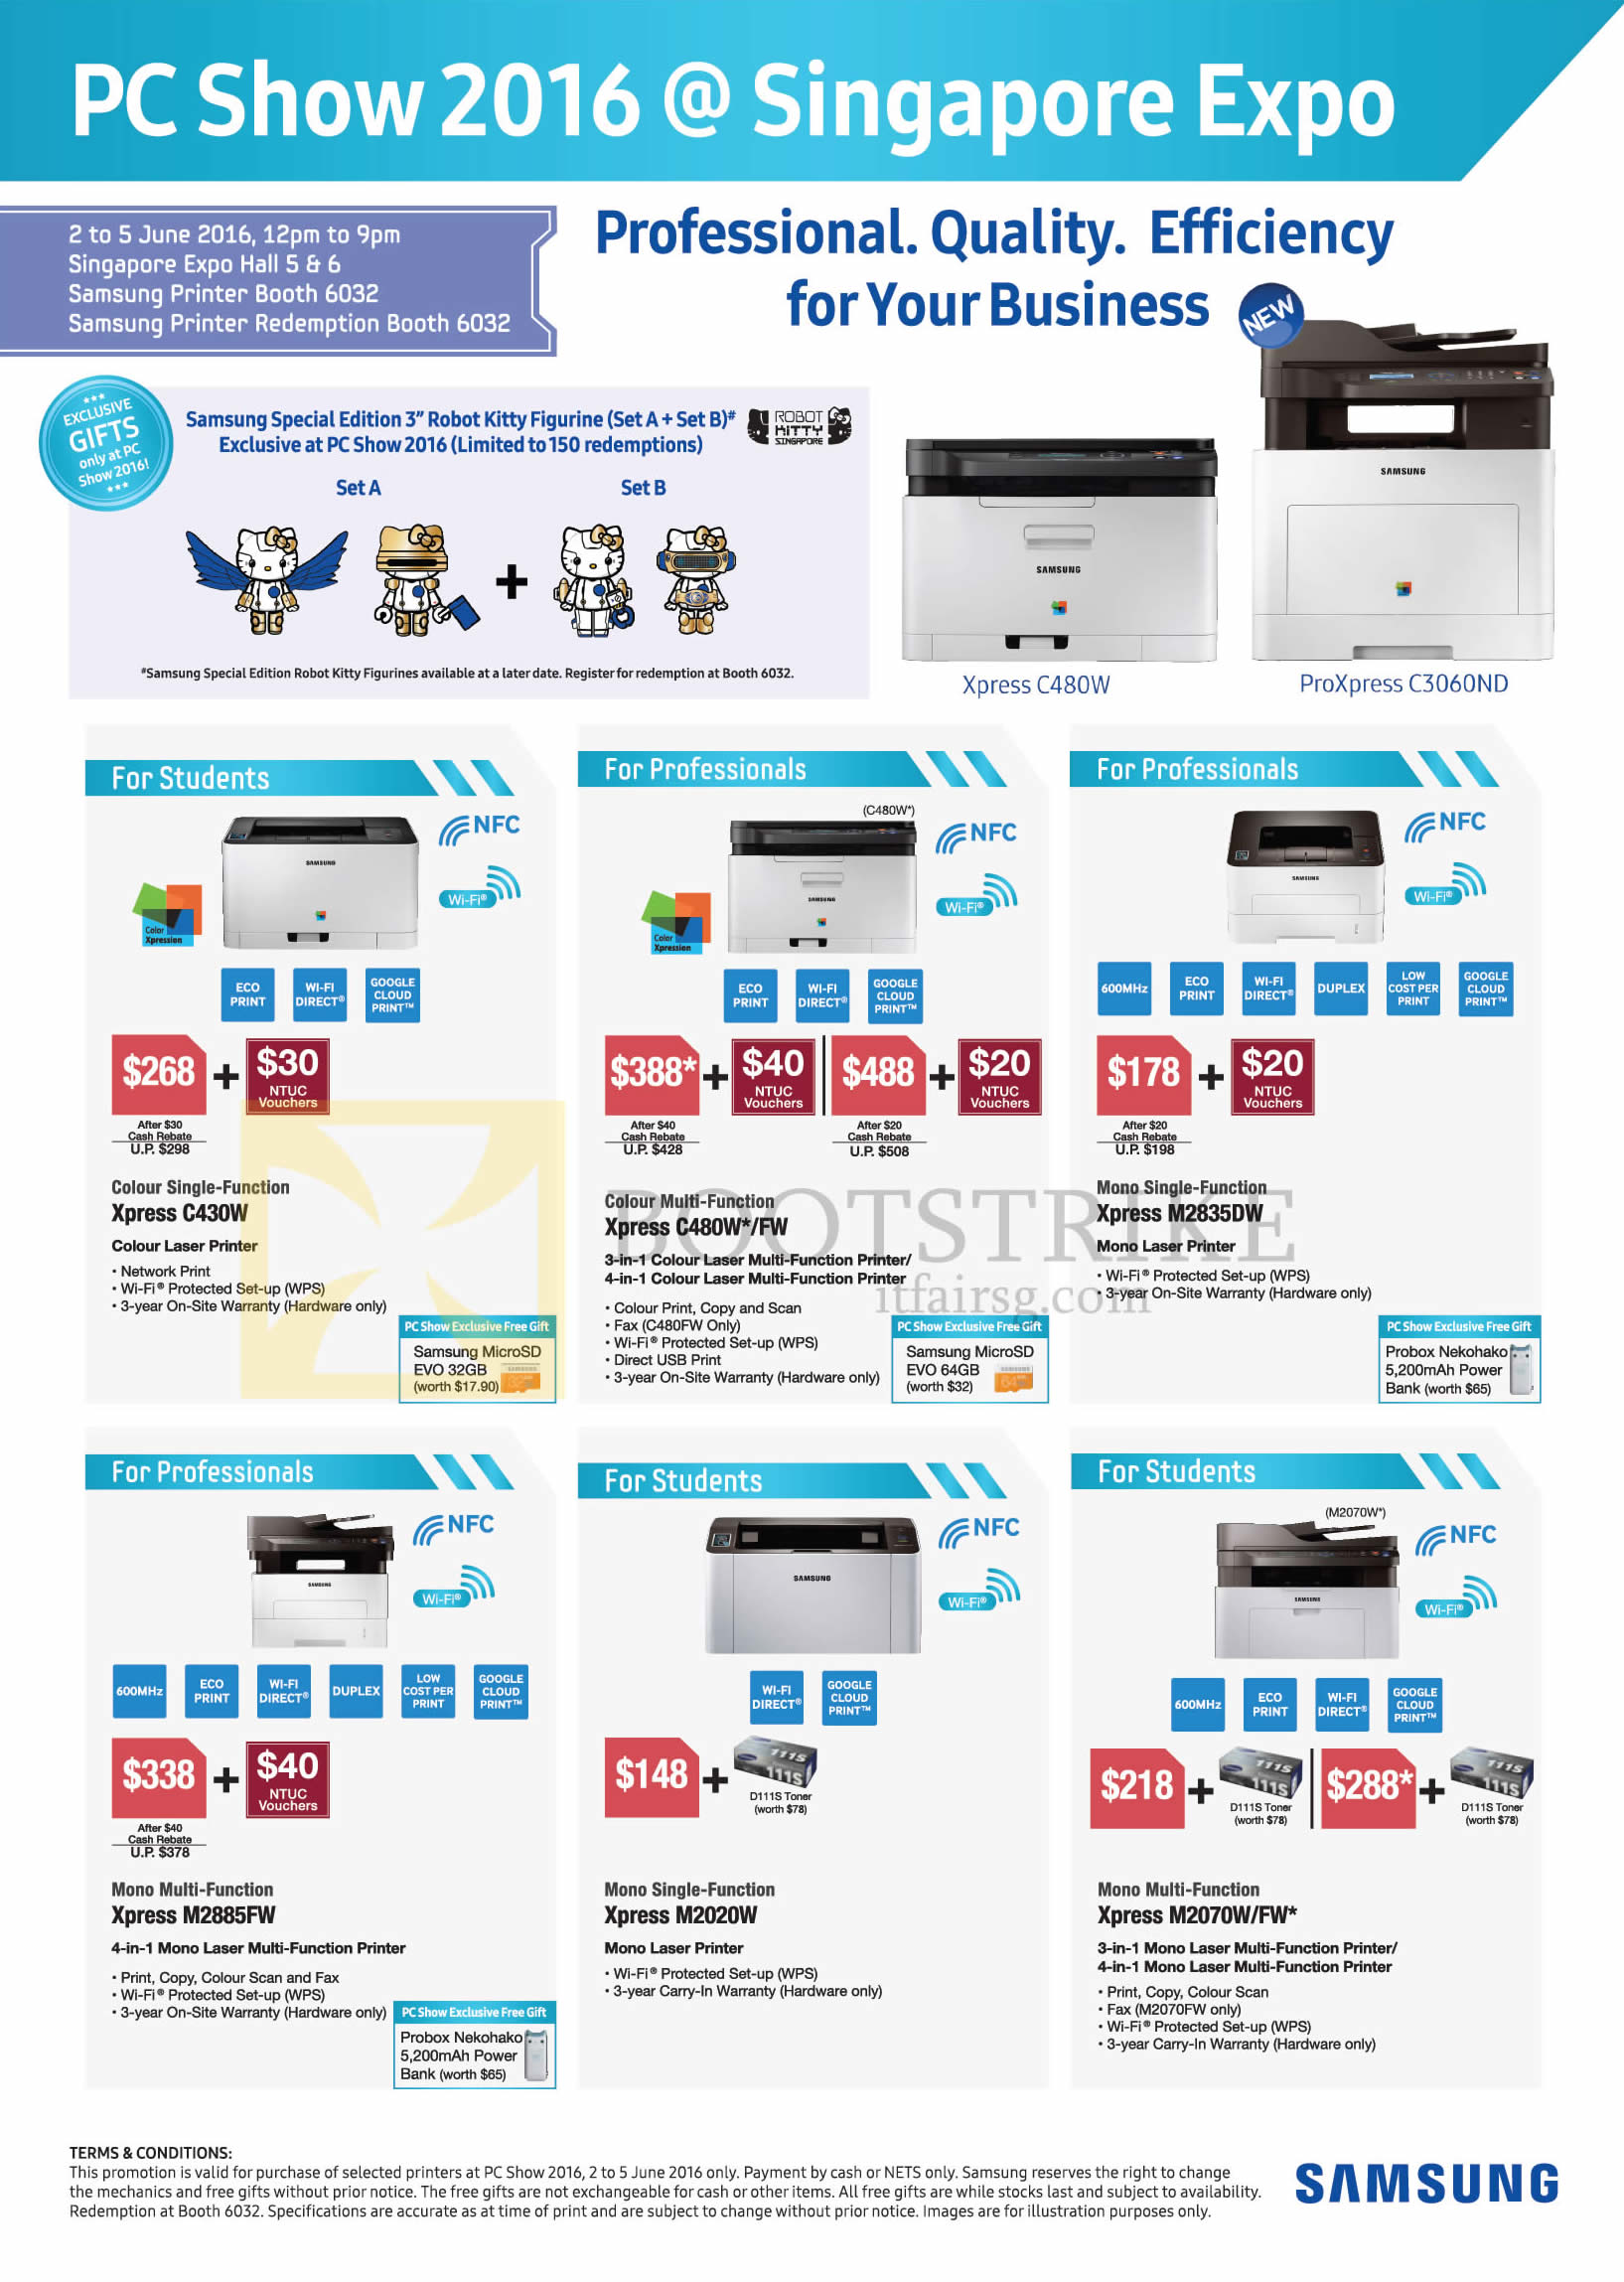 PC SHOW 2016 price list image brochure of Samsung Printers Xpress C480W, C430W, C480W, FW, M2835DW, M2885FW, M2020W, M2070W, FW, ProXpress C3060ND